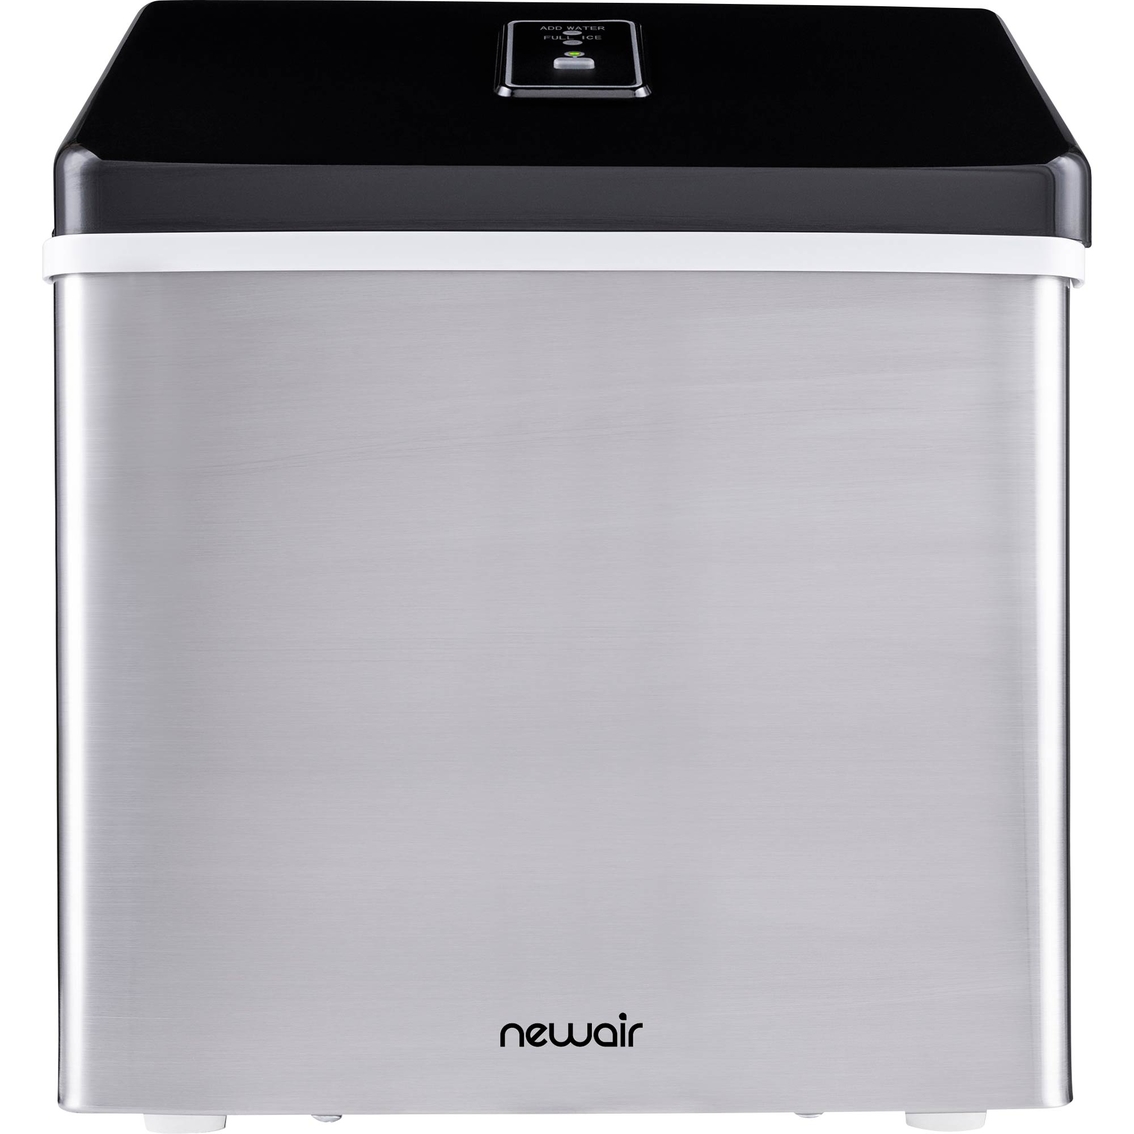 NewAir Counter Top Clear Ice Maker - Image 2 of 9